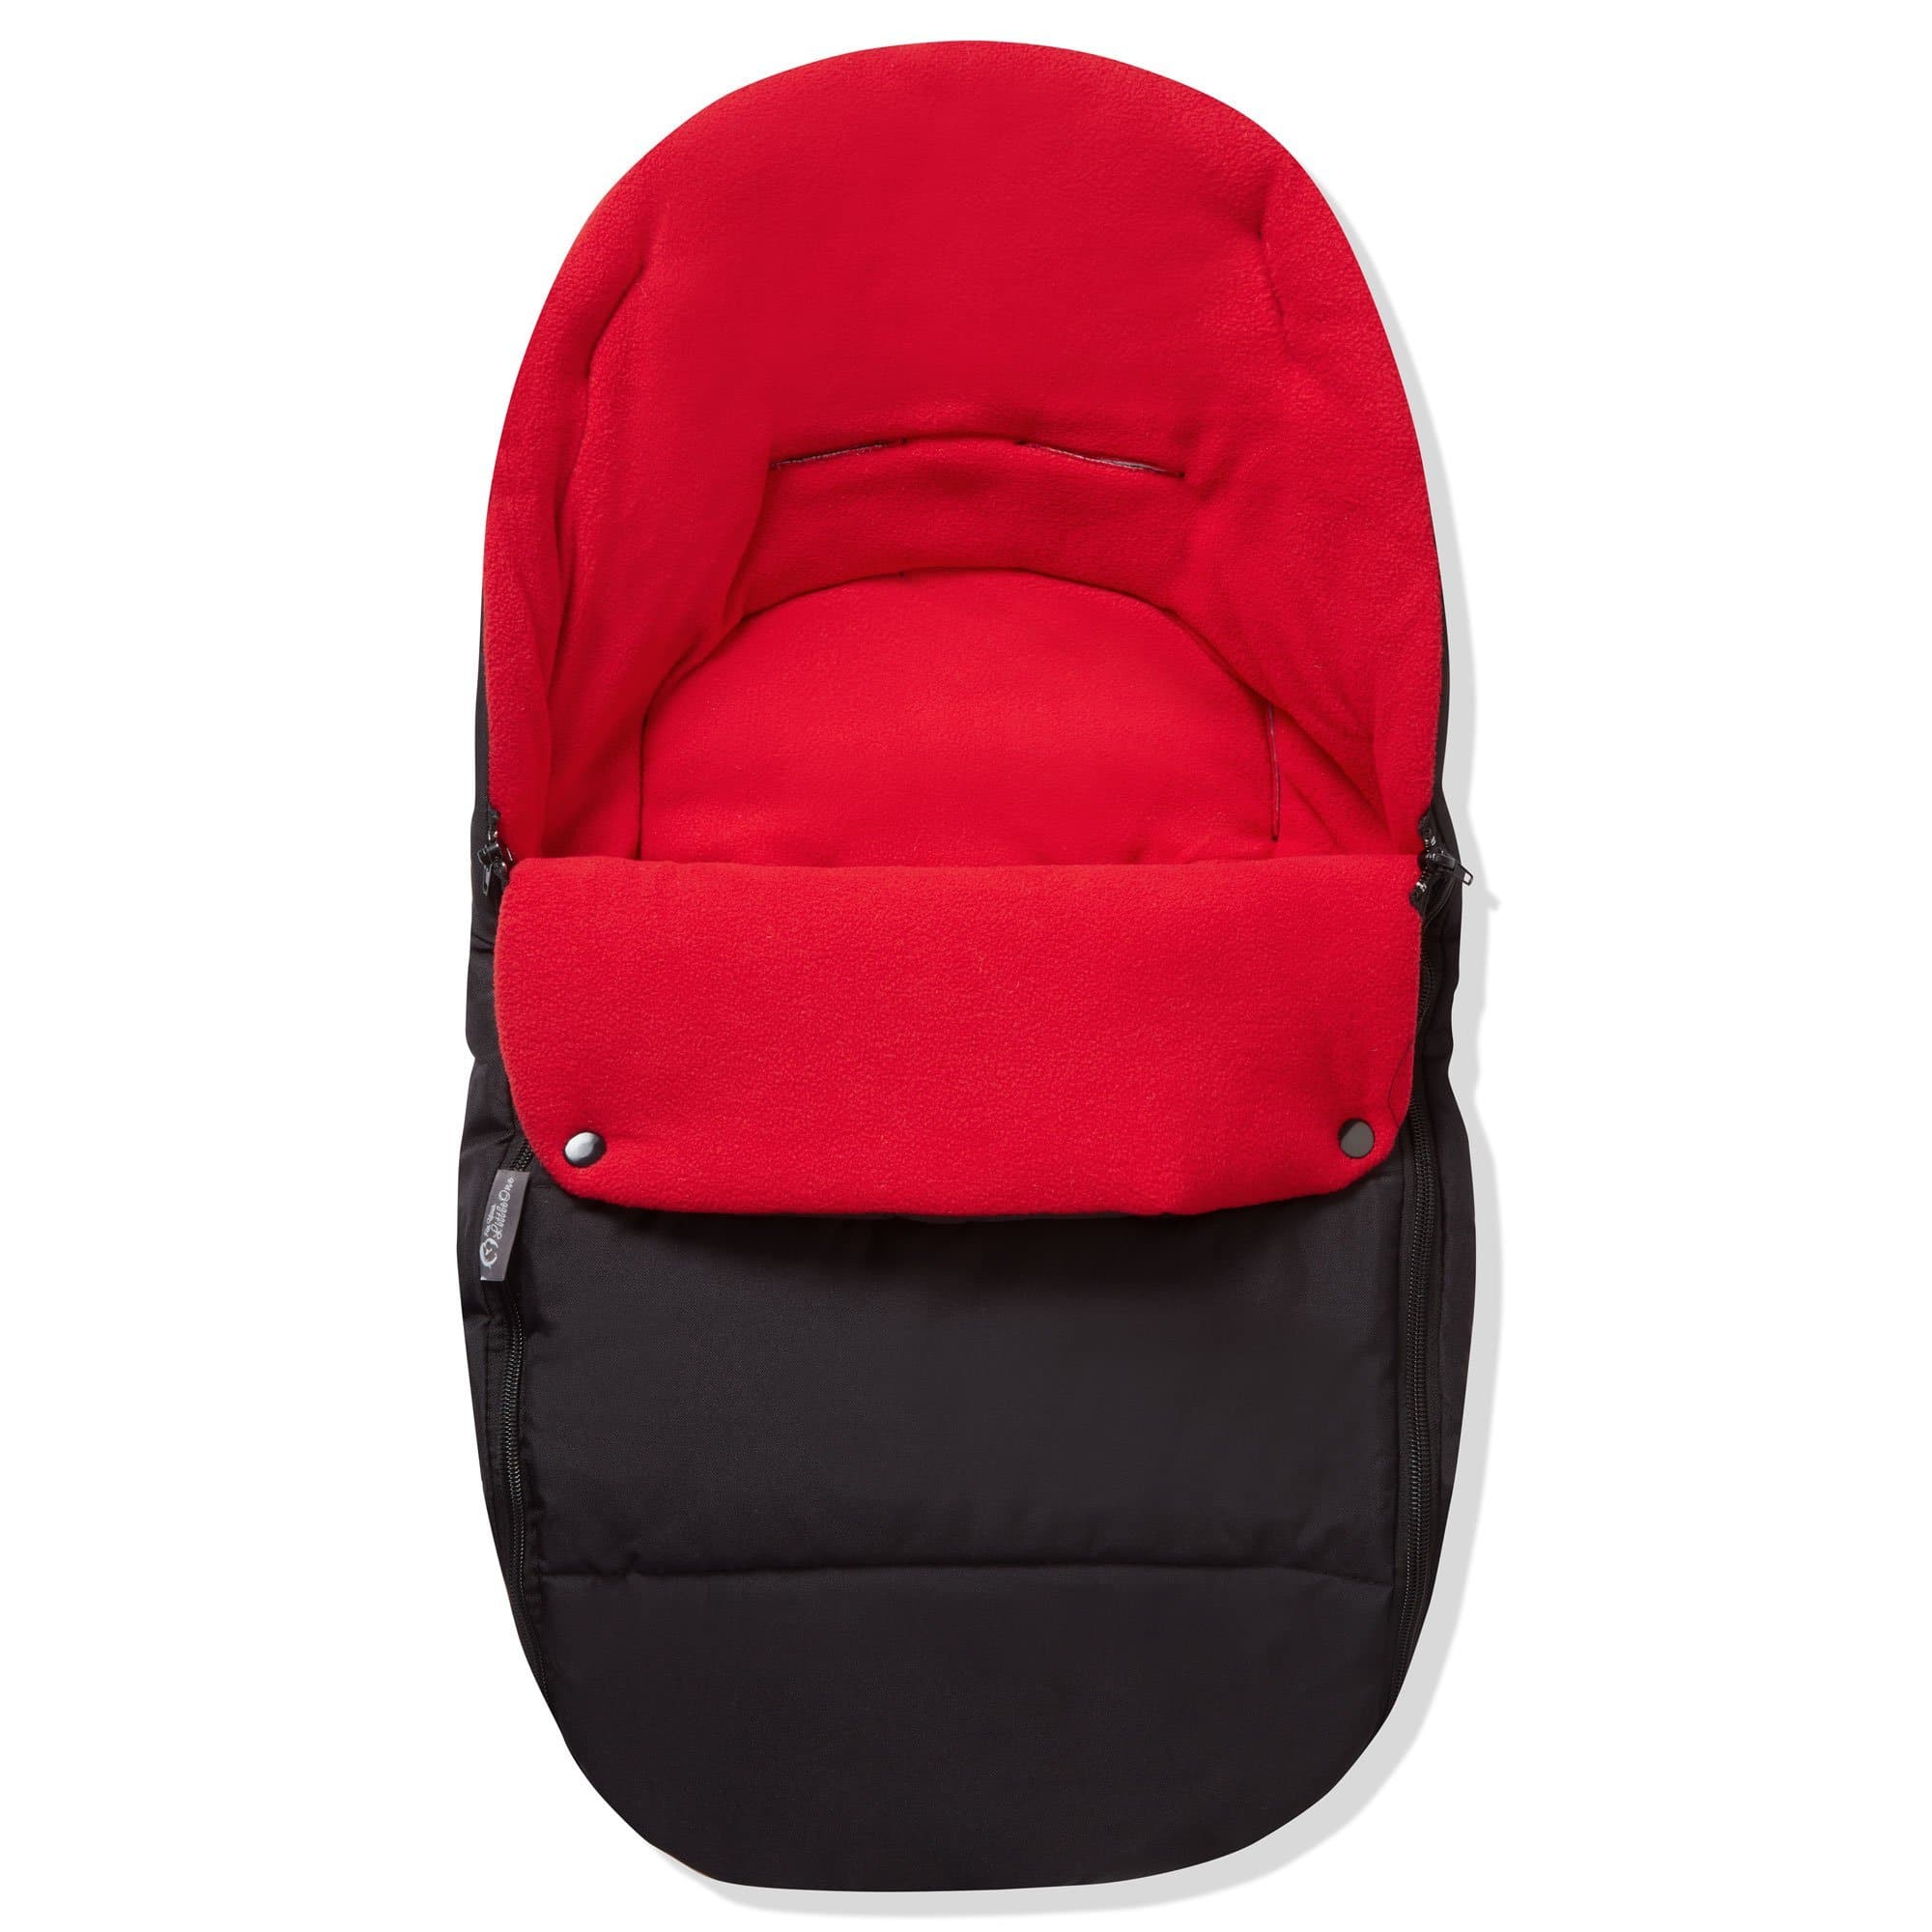 Premium Car Seat Footmuff / Cosy Toes Compatible with Kinderkraft - Fire Red / Fits All Models | For Your Little One